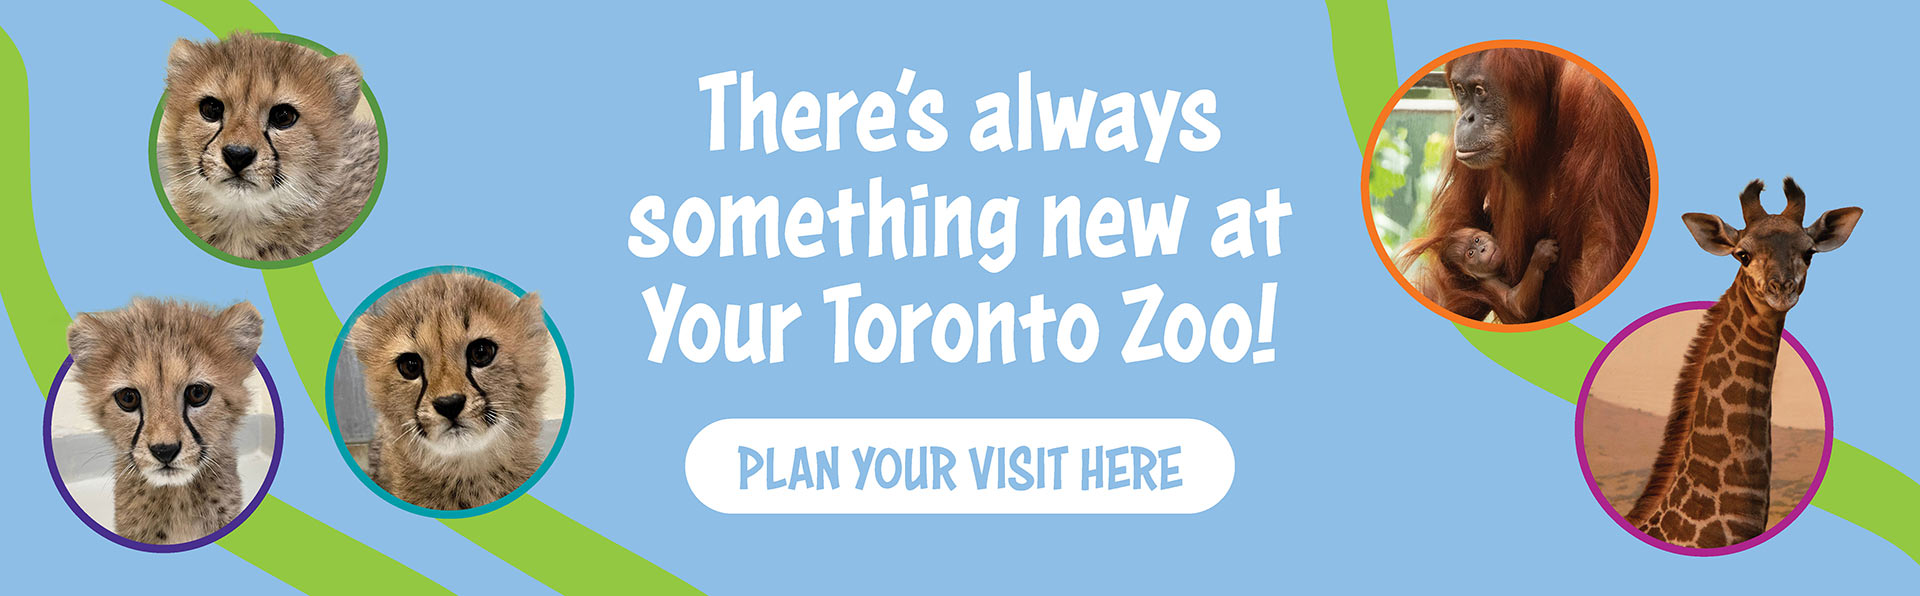 There's always something new at your Toronto Zoo